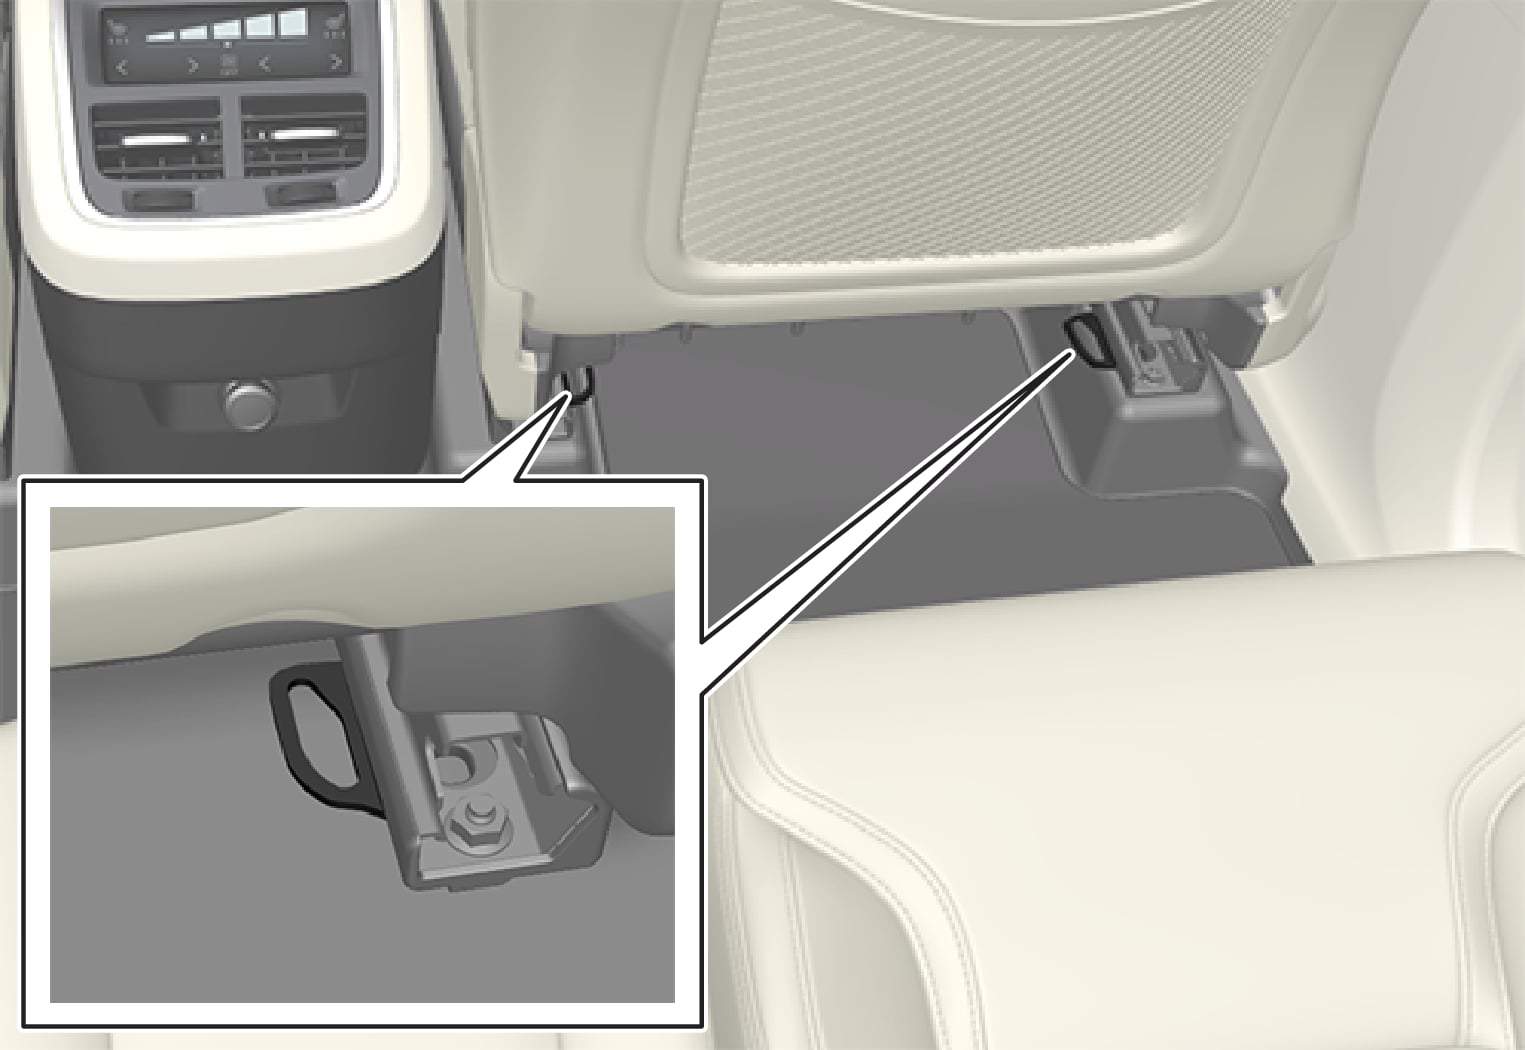 C40 Recharge i-Size/ISOFIX mounting points for child seats